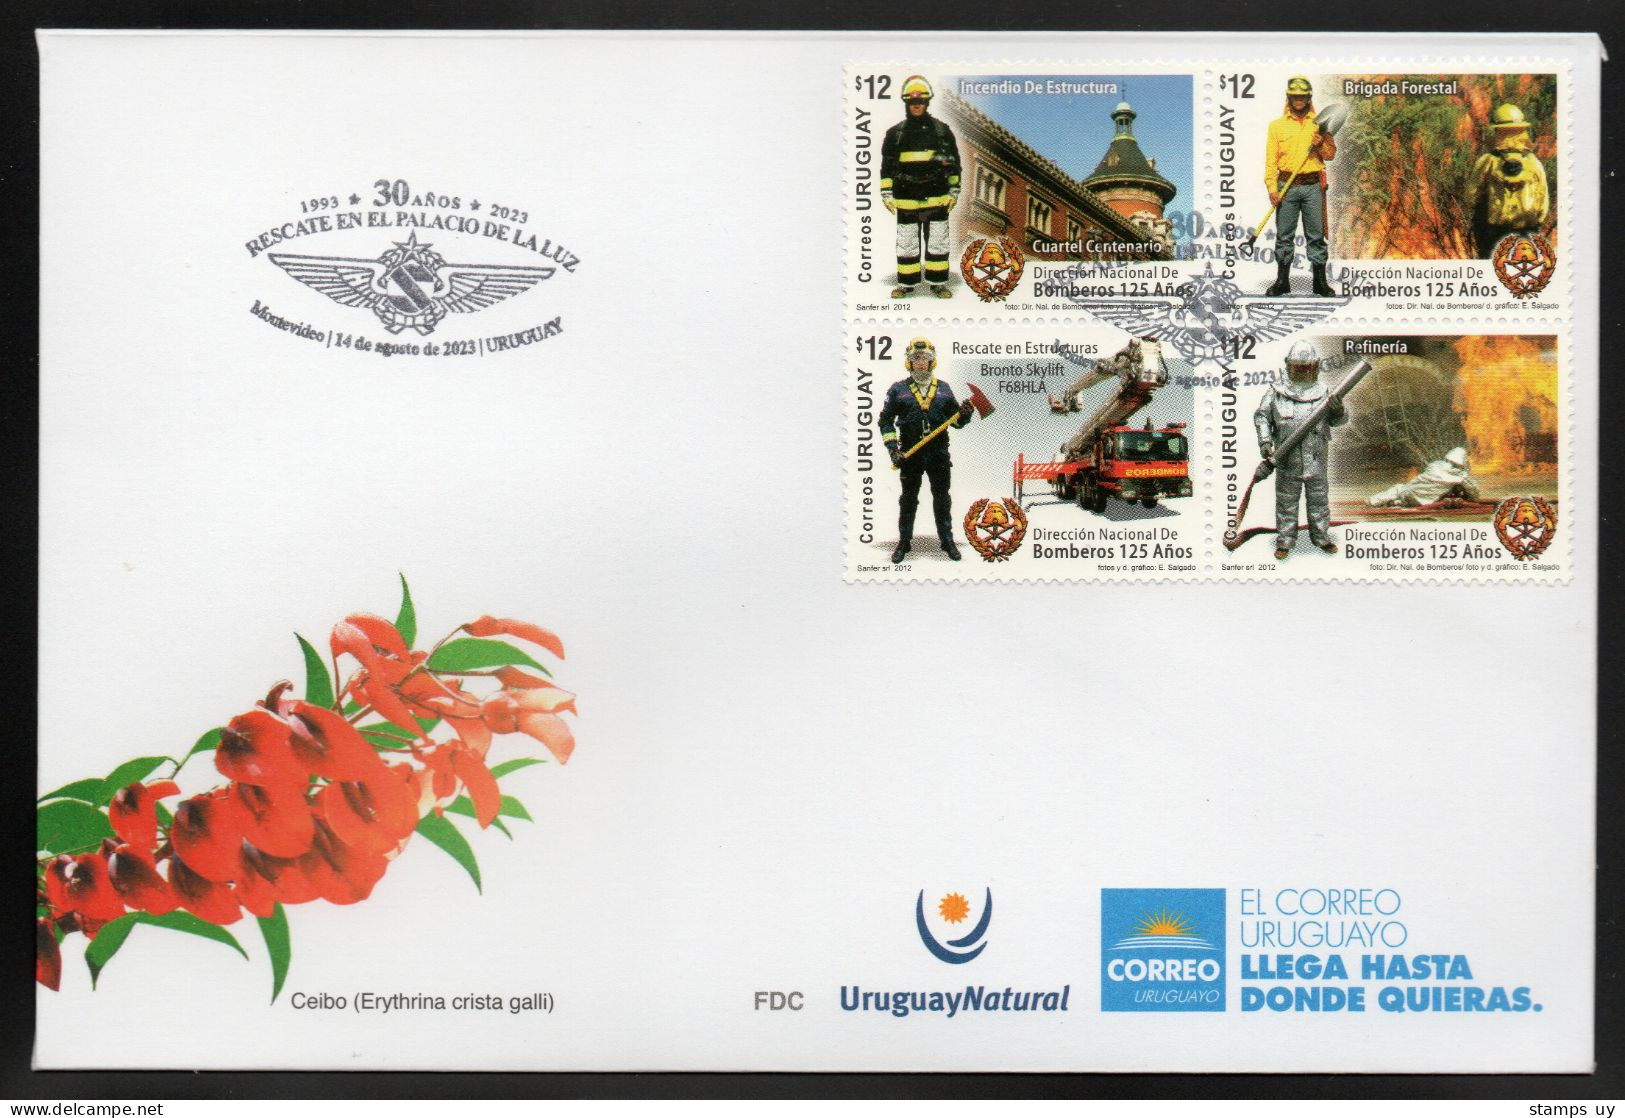 URUGUAY 2023 (Fireman, Air Force, Truck, Crane, Bronto Skylift, Refinery, Protection Suit) – Cover With Special Postmark - Chemistry